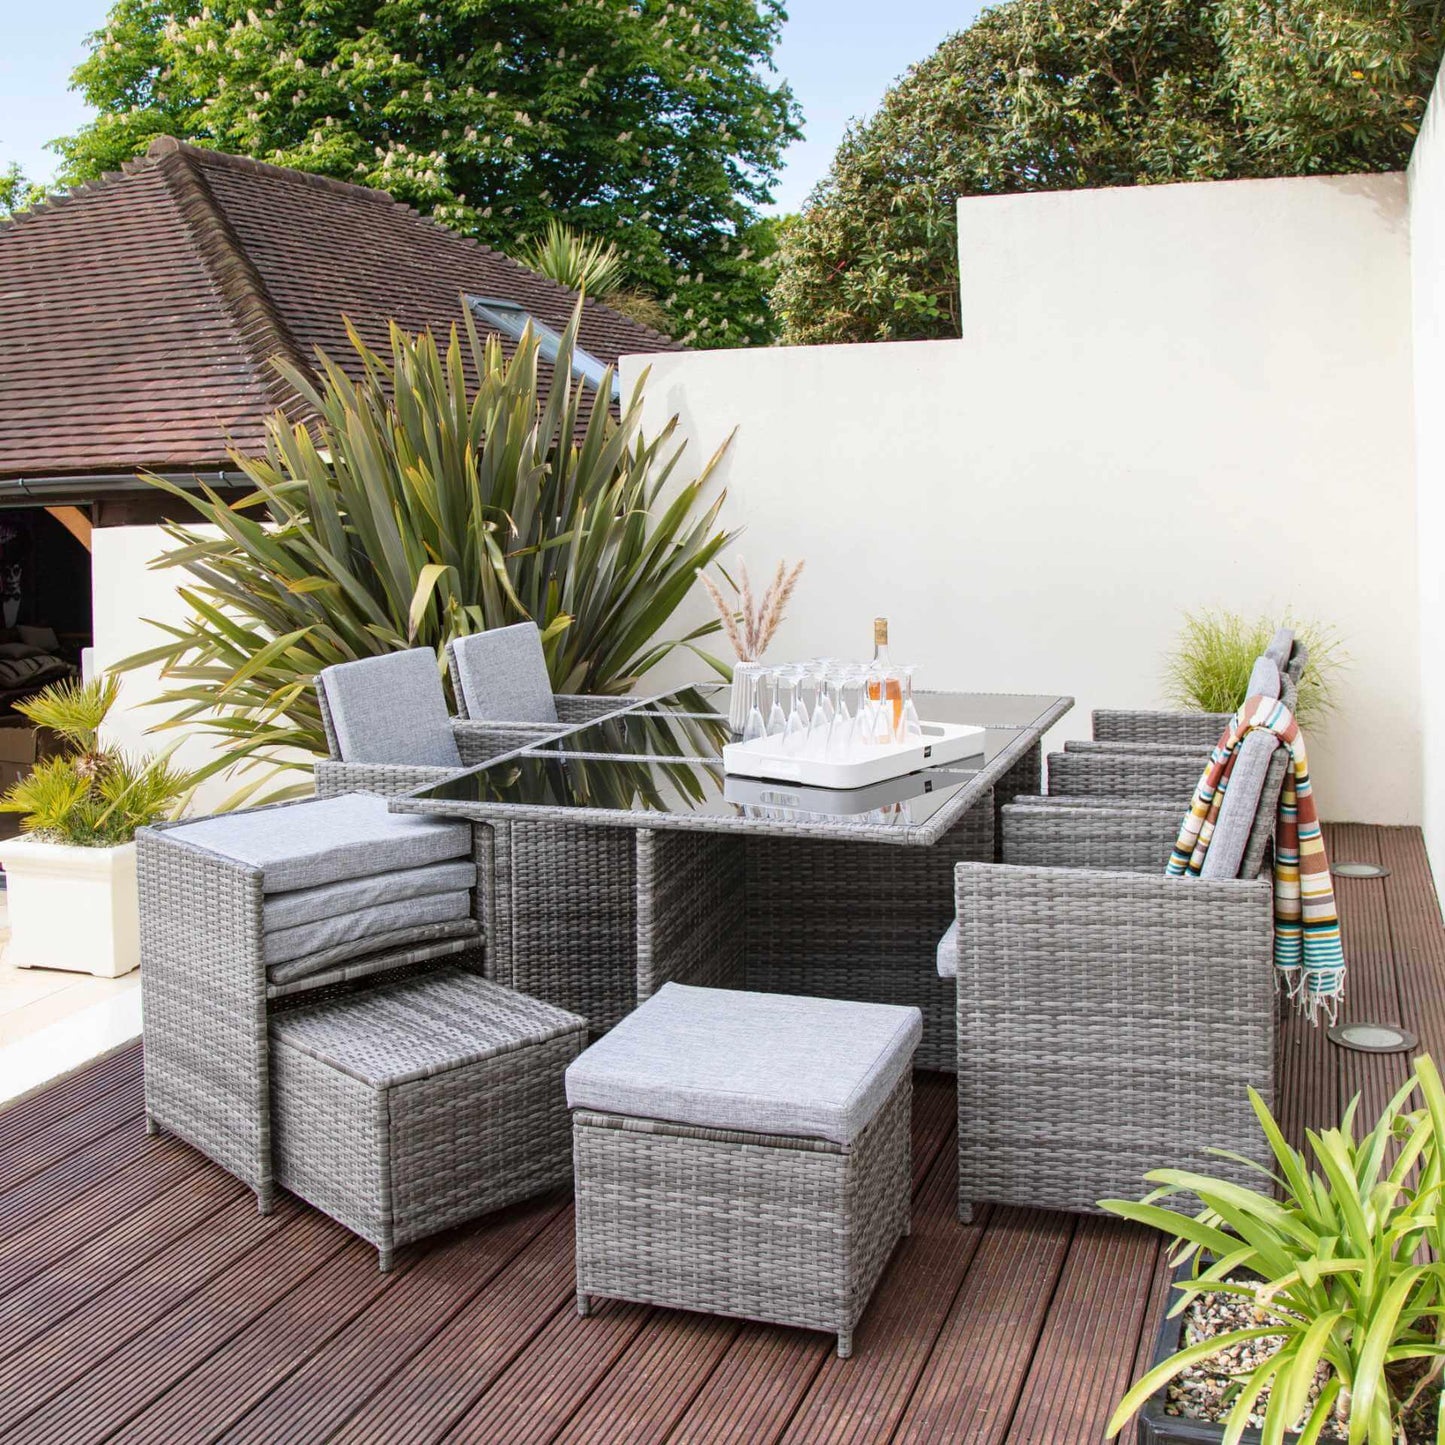 10 Seater Rattan Cube Outdoor Dining Set - Grey Weave - Laura James